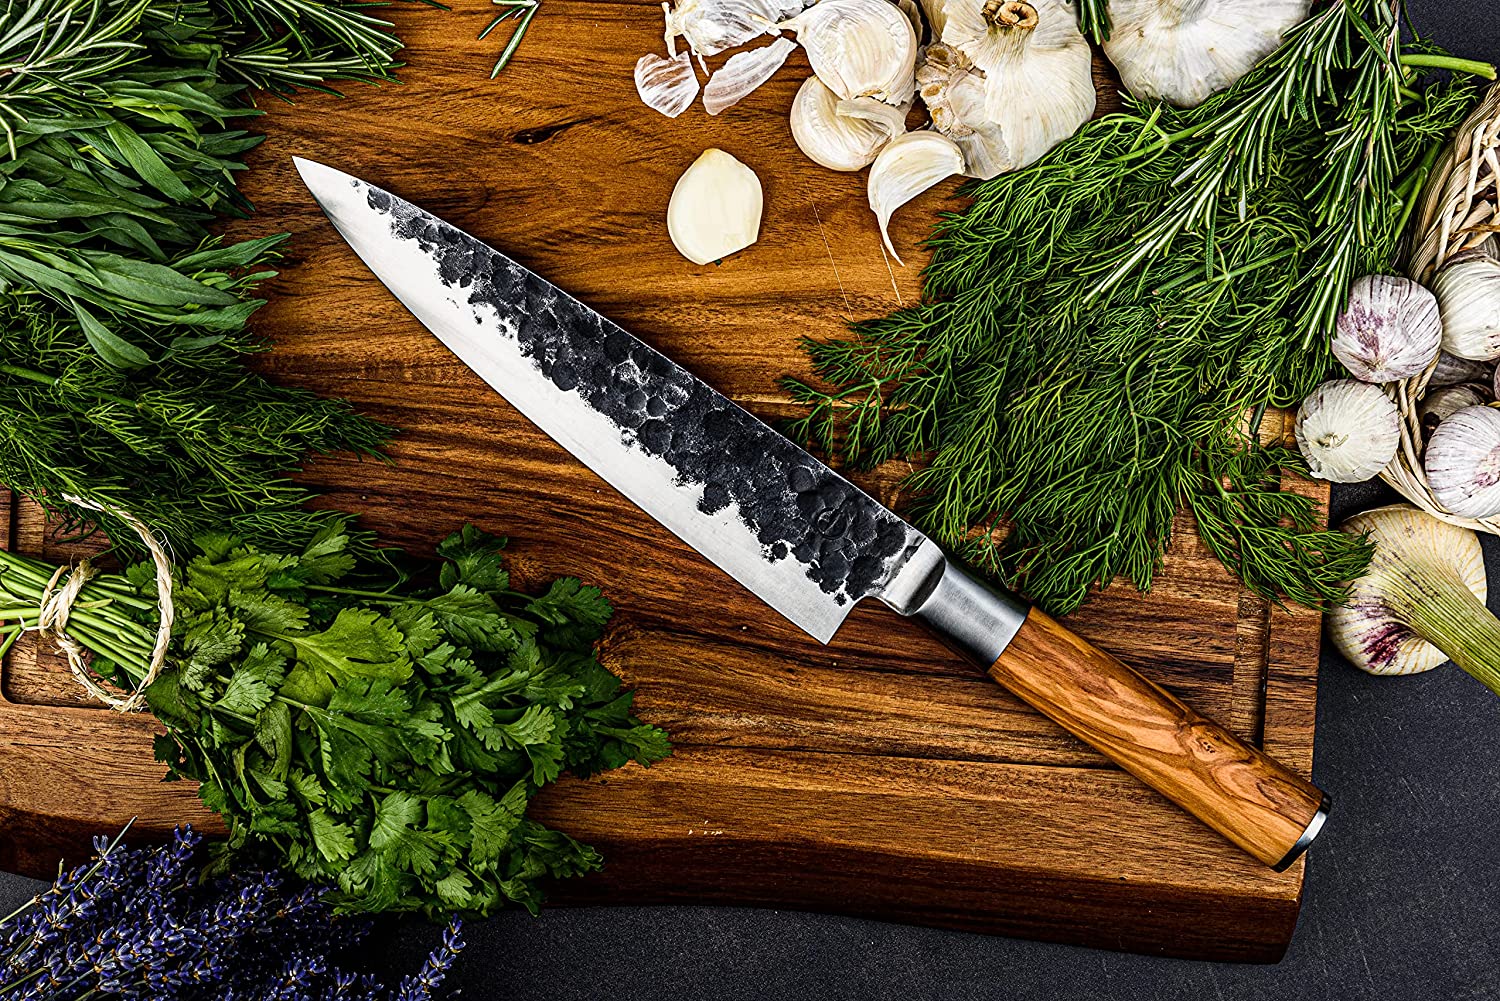 https://www.woklove.com/wp-content/uploads/2022/06/Forged-Olive-Chefs-knife-herbs.jpg